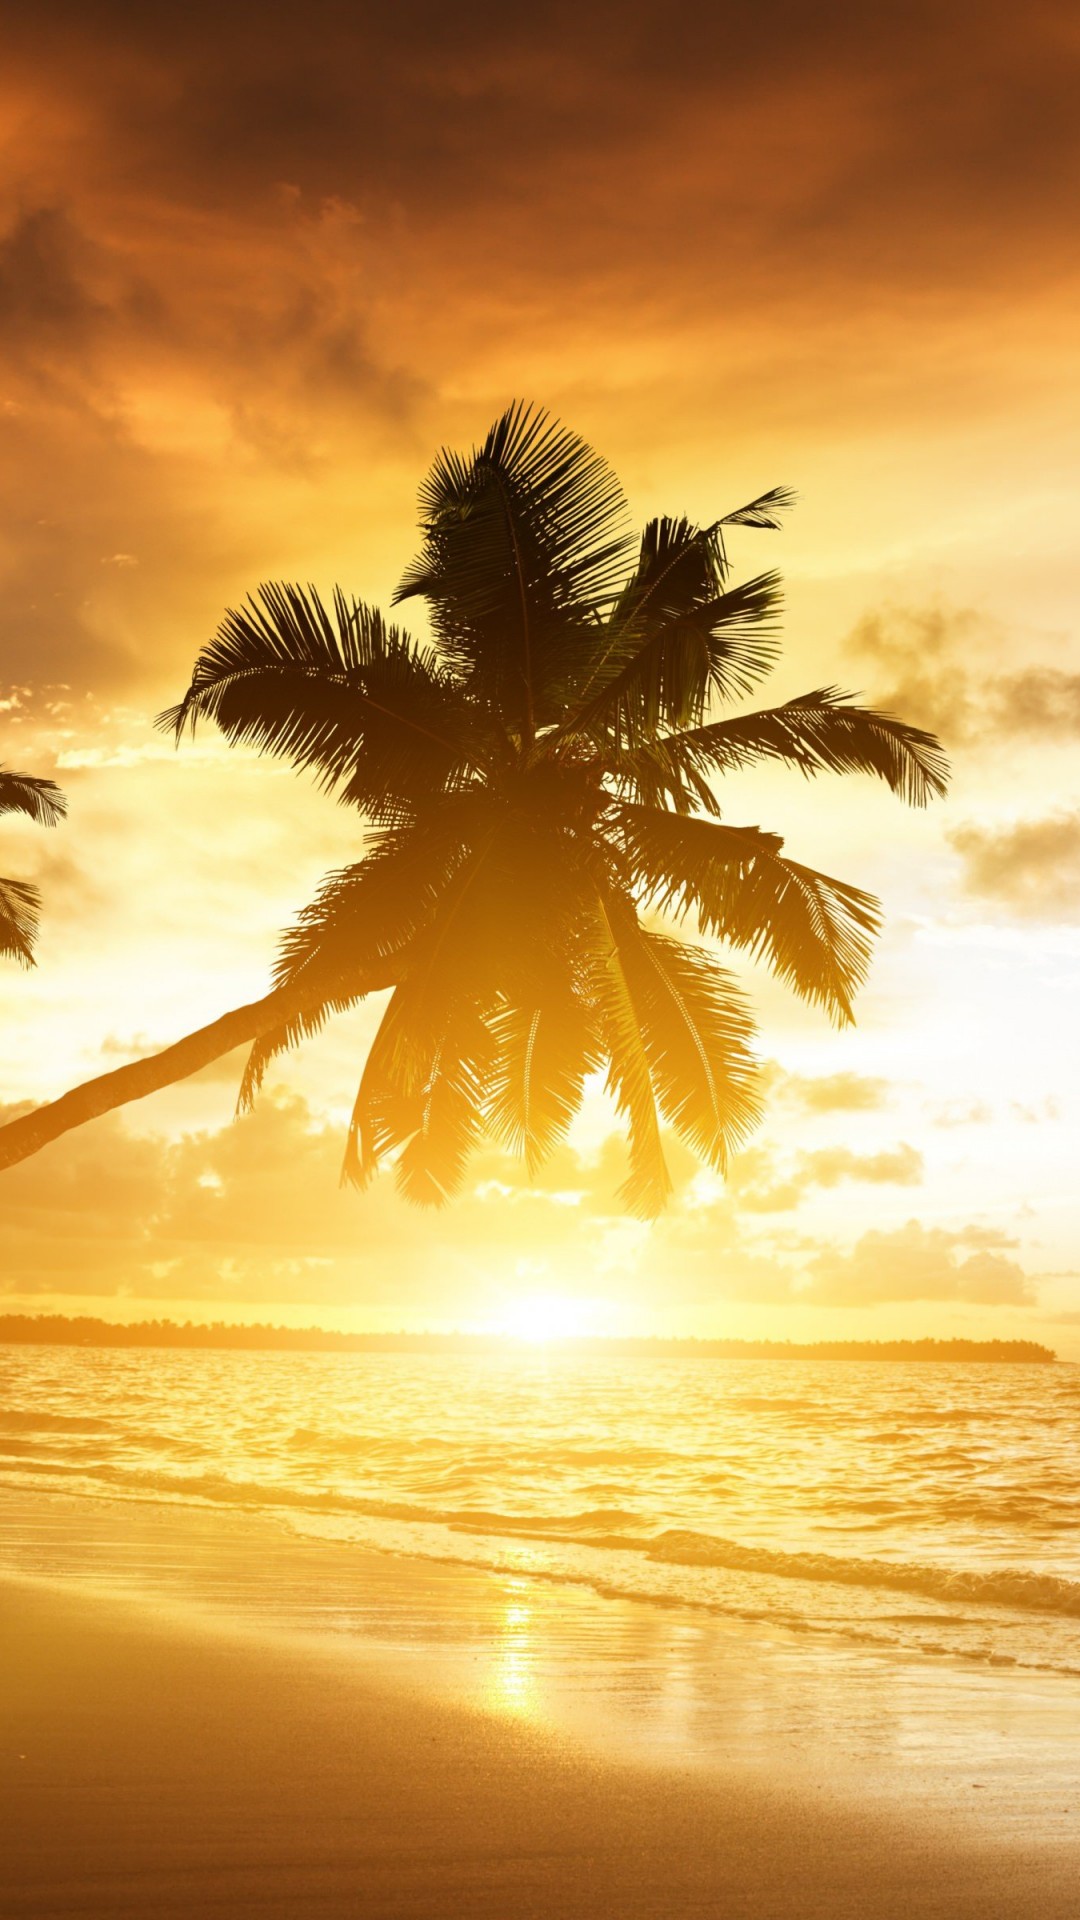 Beach With Palm Trees At Sunset Wallpaper for SAMSUNG Galaxy Note 3